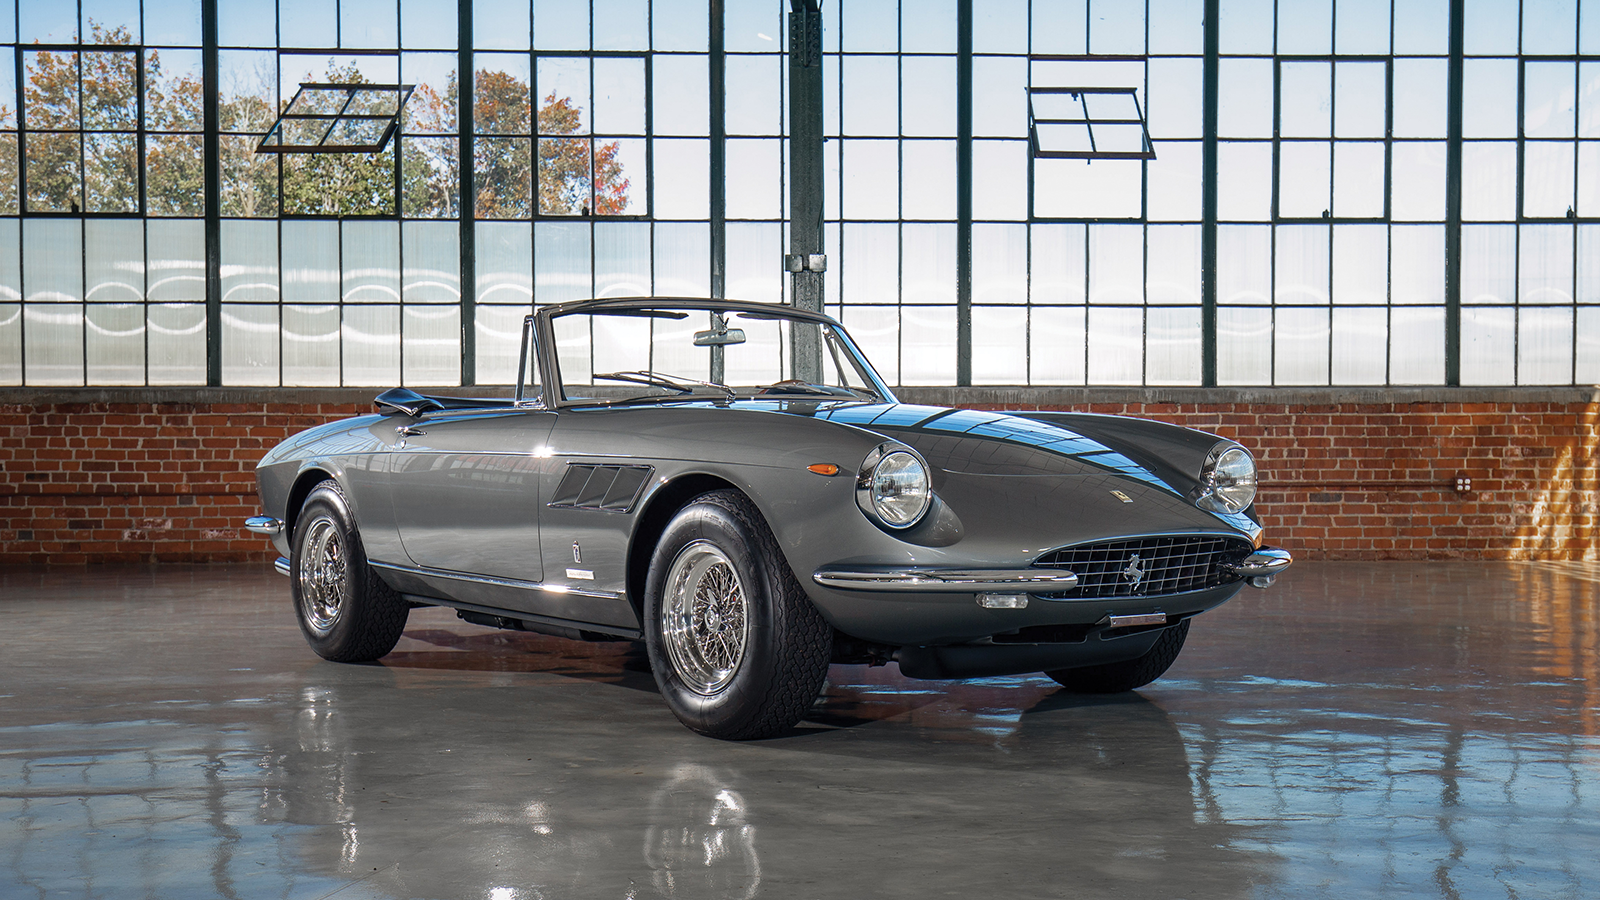 The 20 most expensive classics sold at Scottsdale 2020